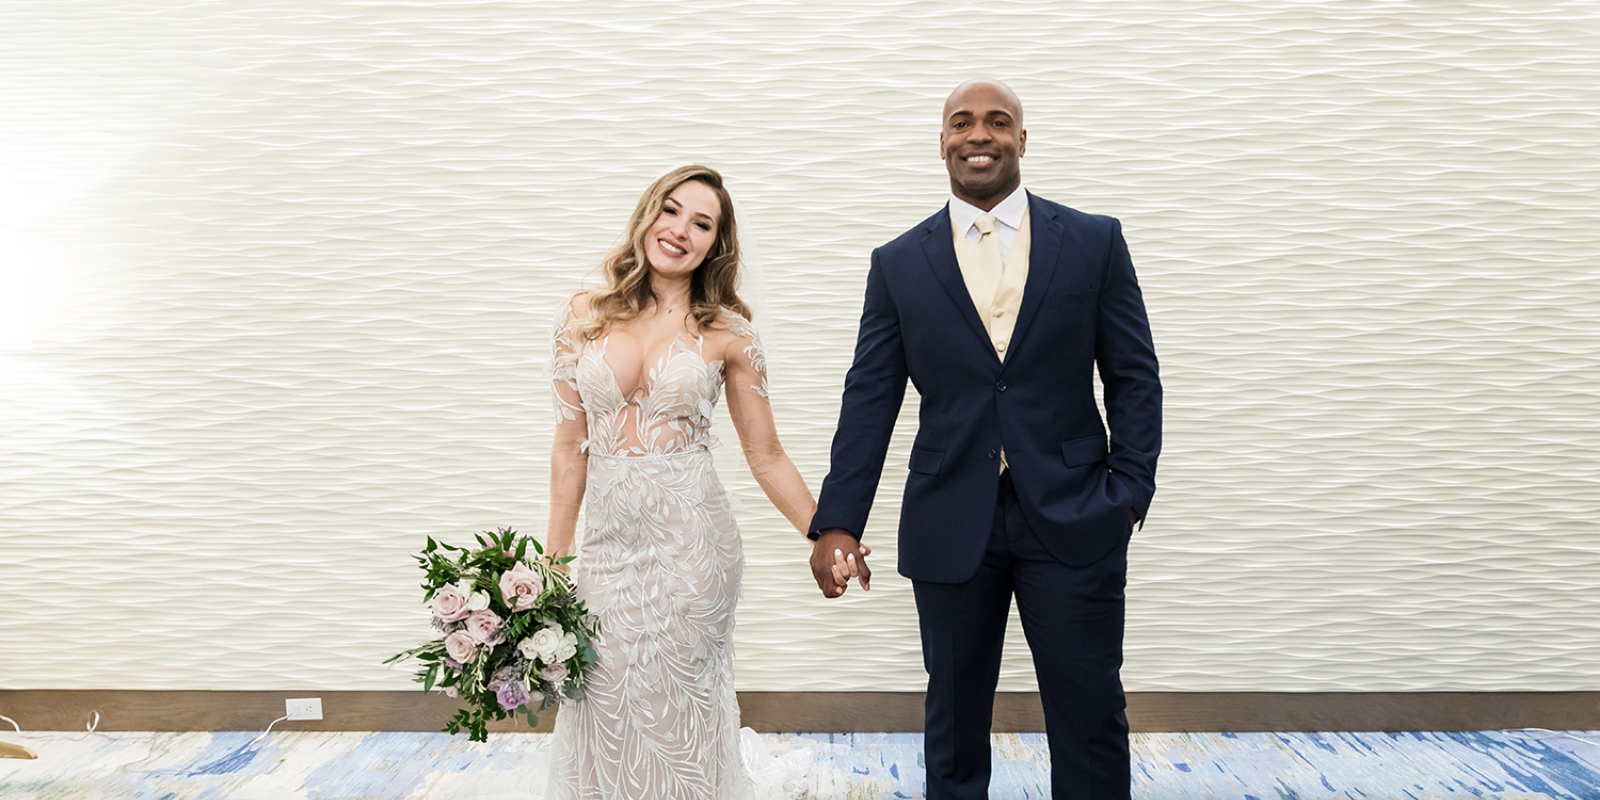 Married At First Sight What To Know About Season 13 Couple Myrla & Gil